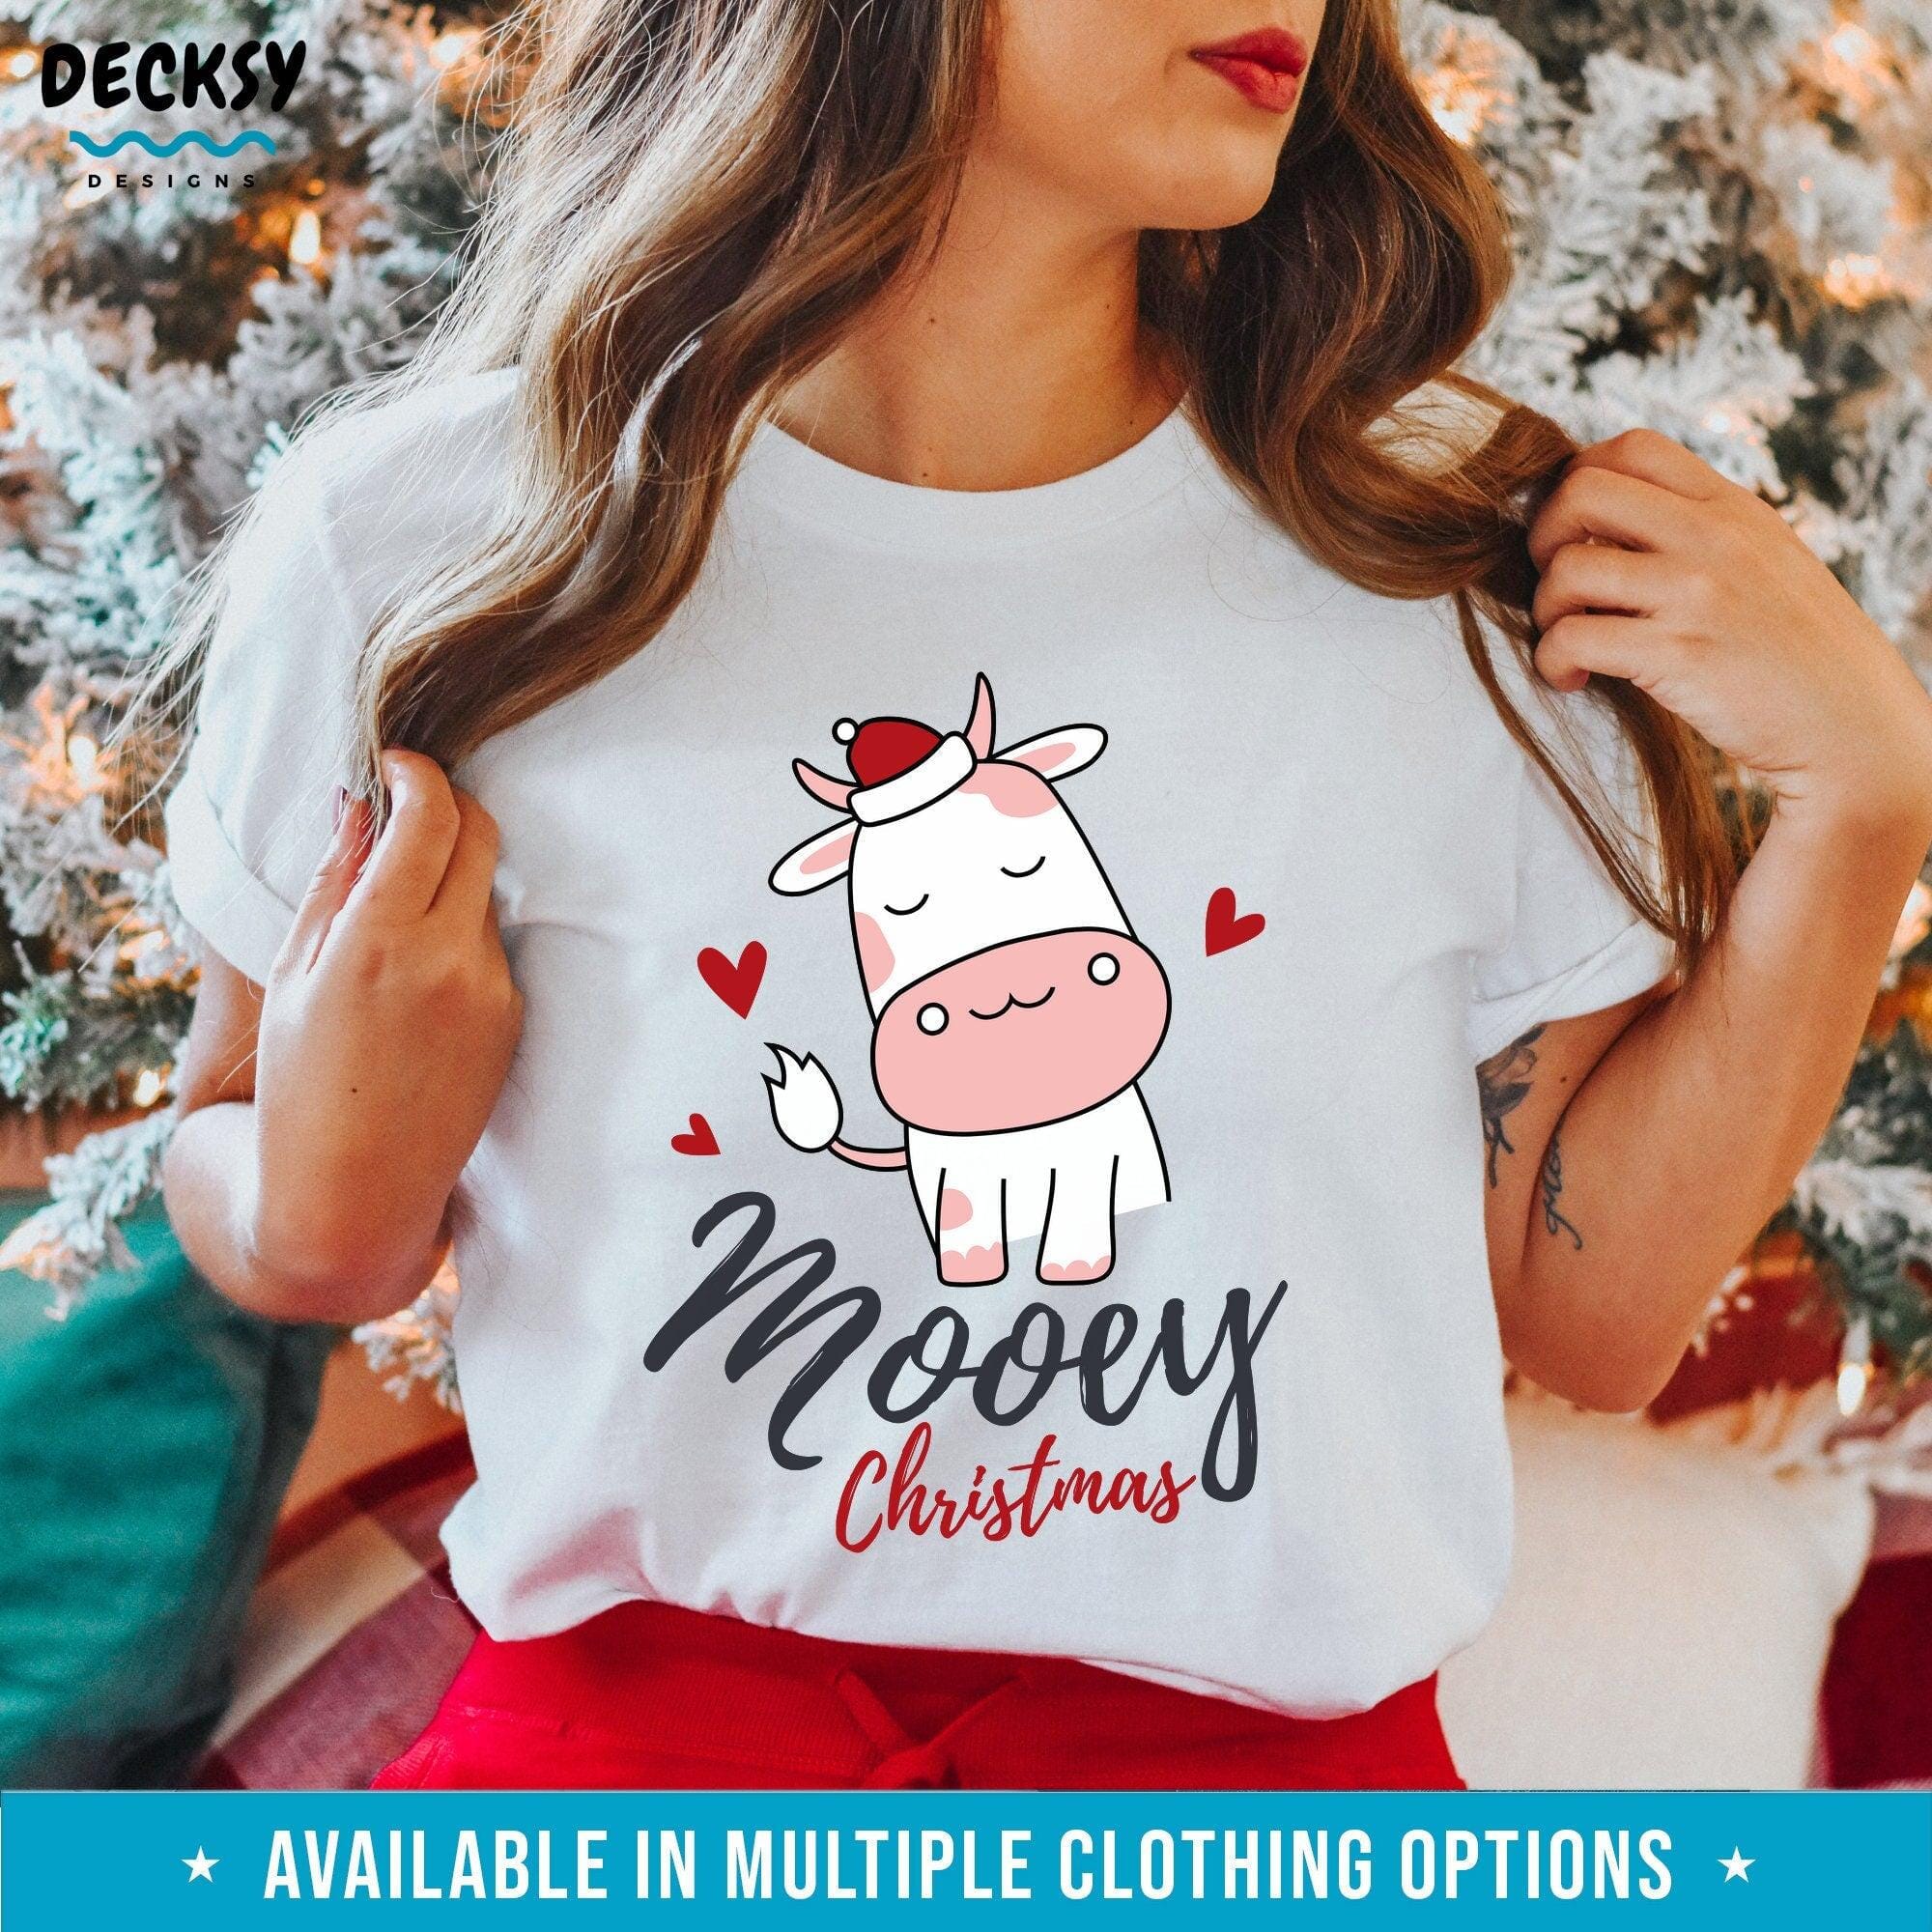 Cow Christmas Shirt, Mooey Christmas Gift-Clothing:Gender-Neutral Adult Clothing:Tops & Tees:T-shirts:Graphic Tees-DecksyDesigns